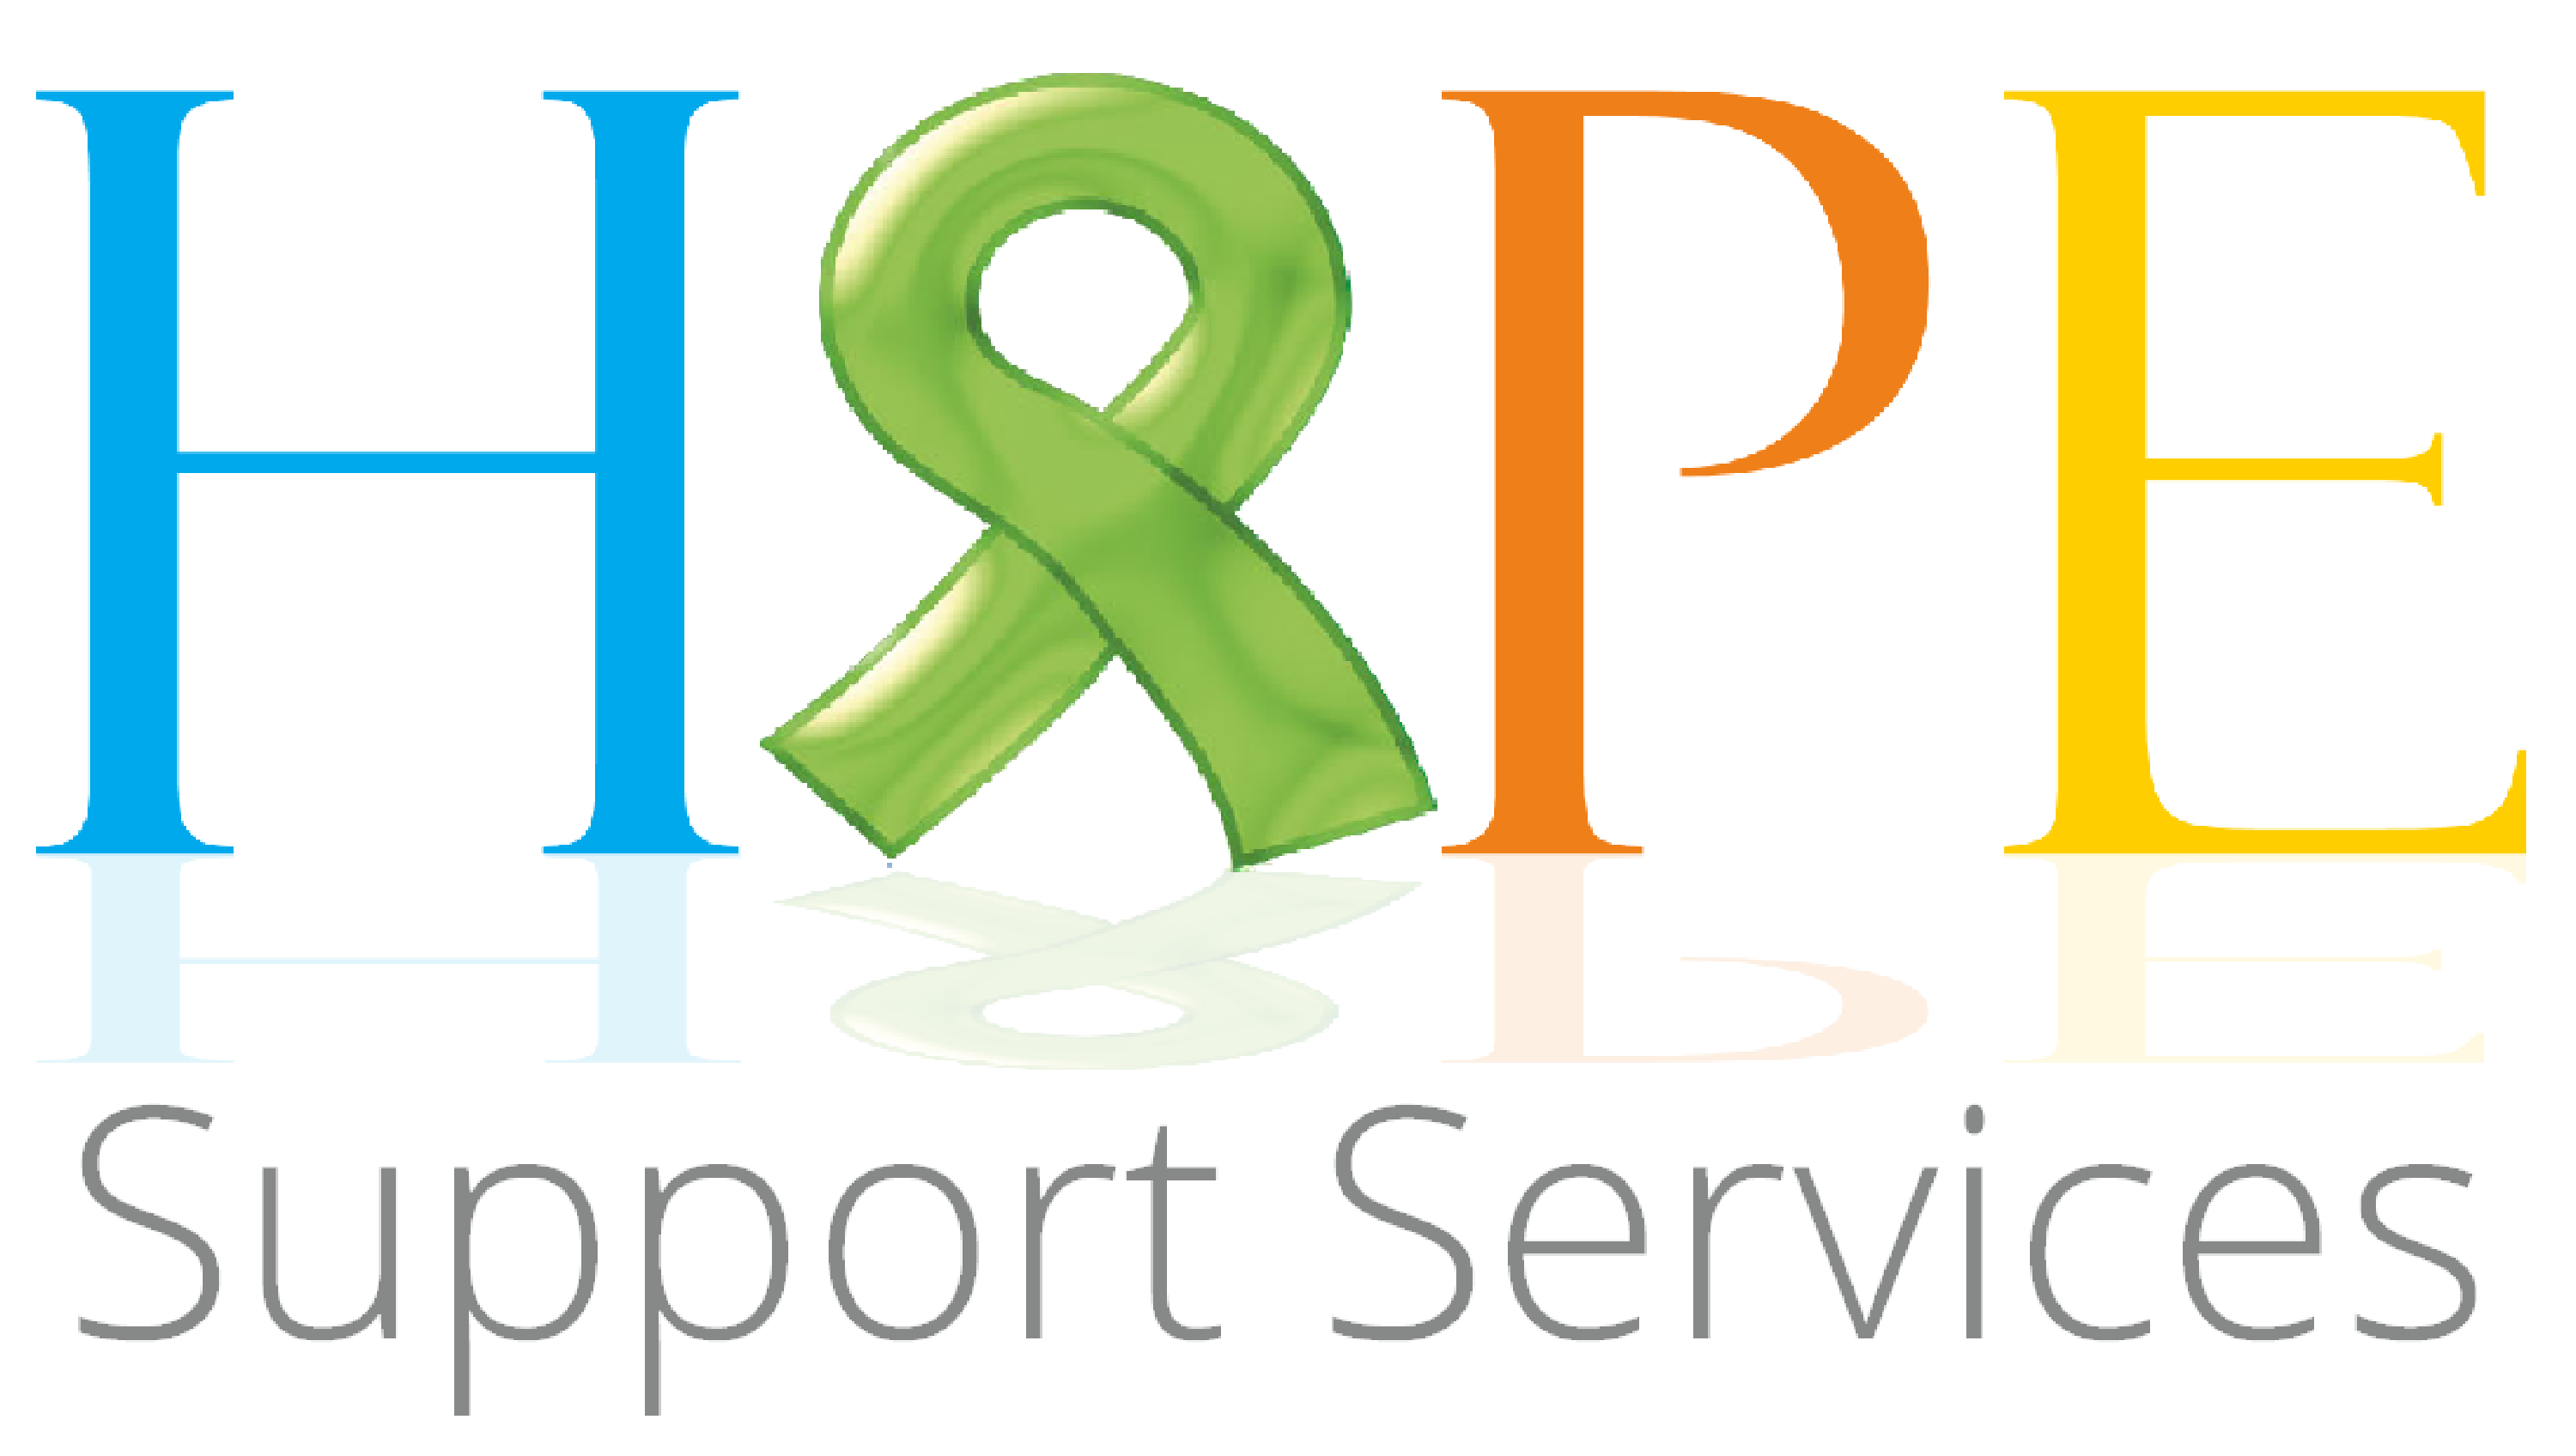 hope clipart support hand